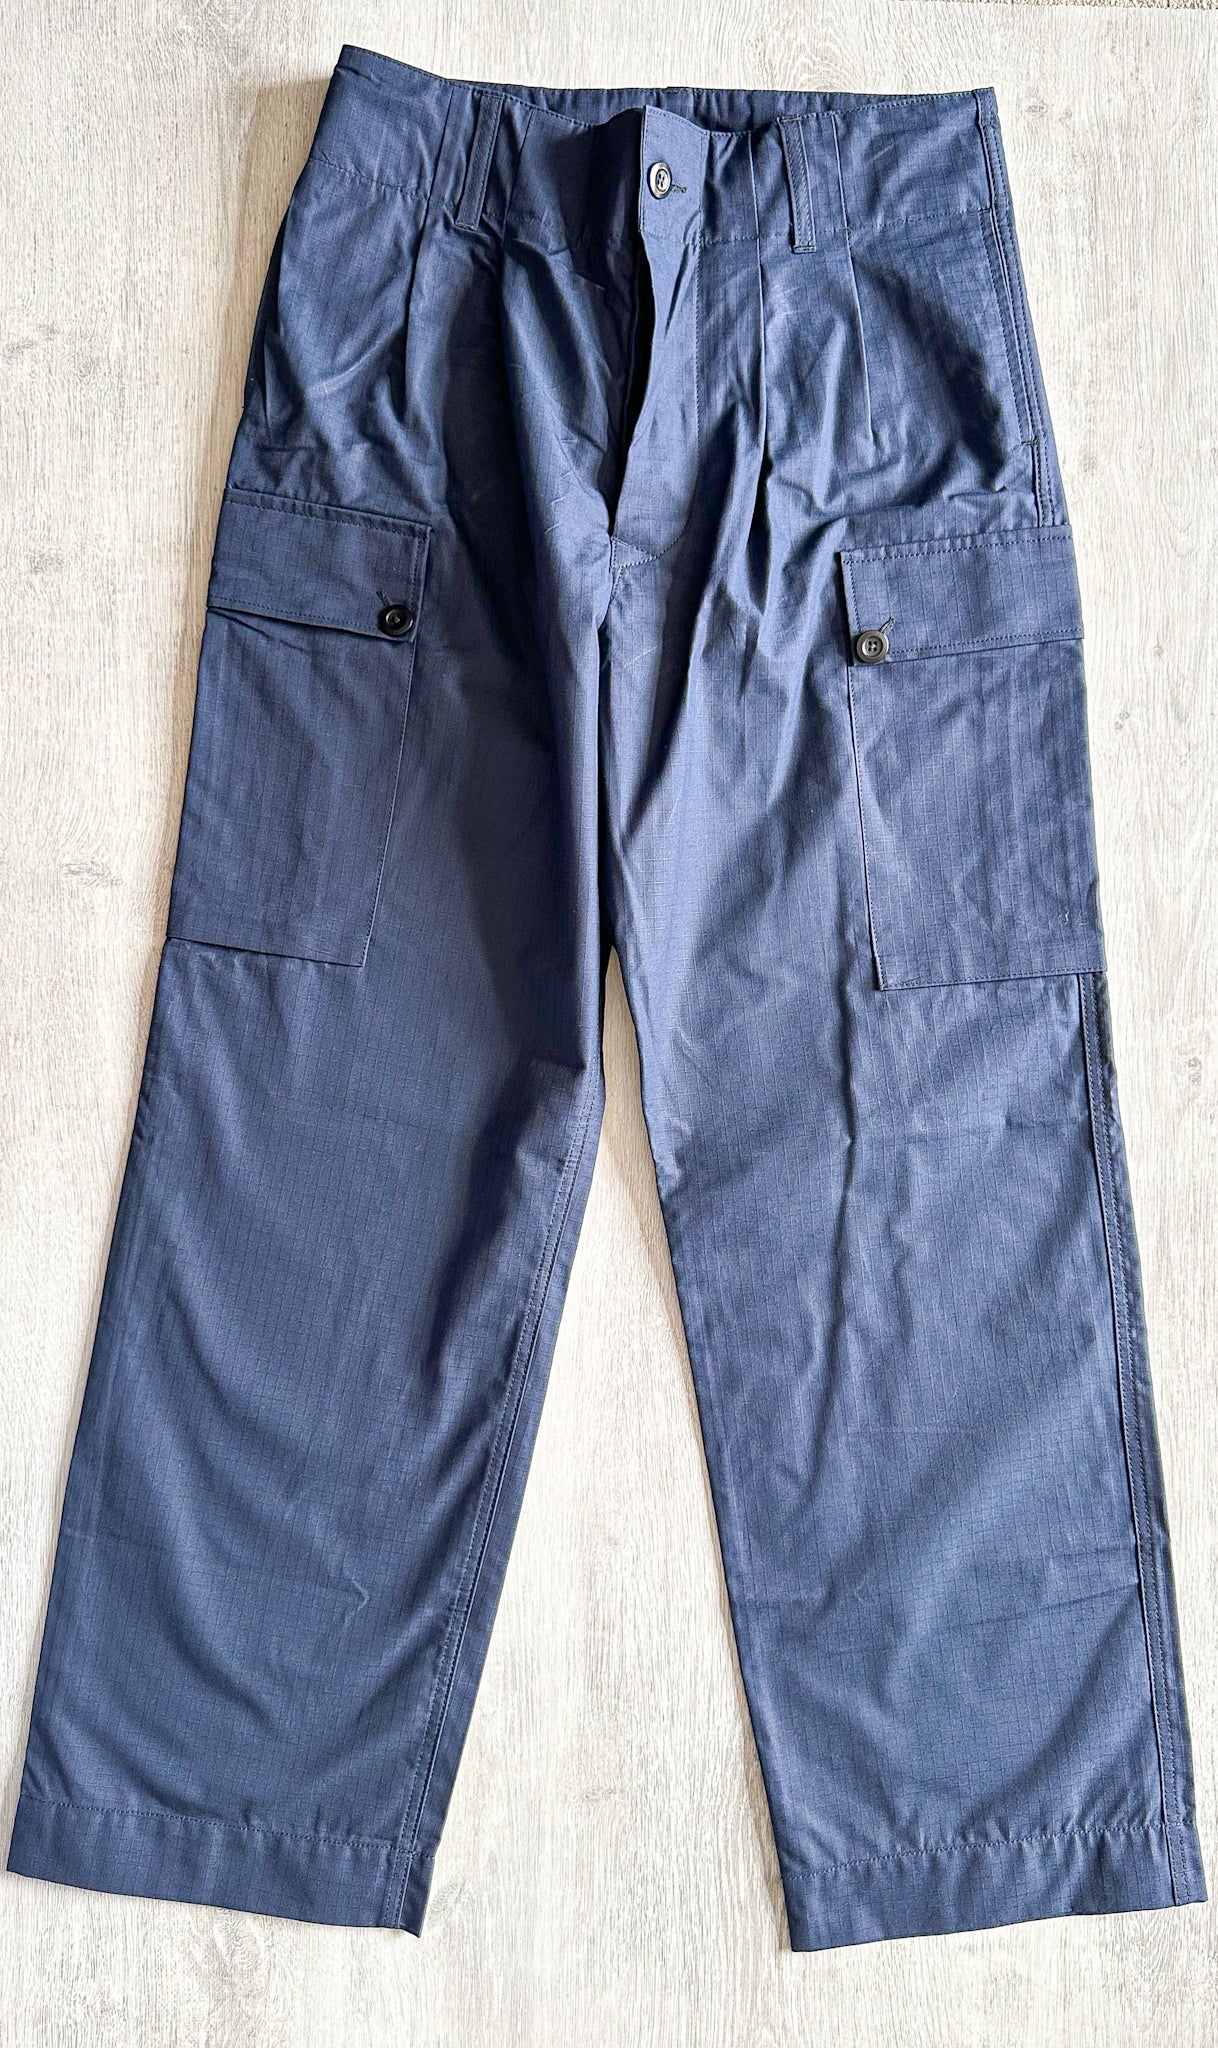 Nigel Cabourn PIPED PANT COTTON RIPSTOP - パンツ